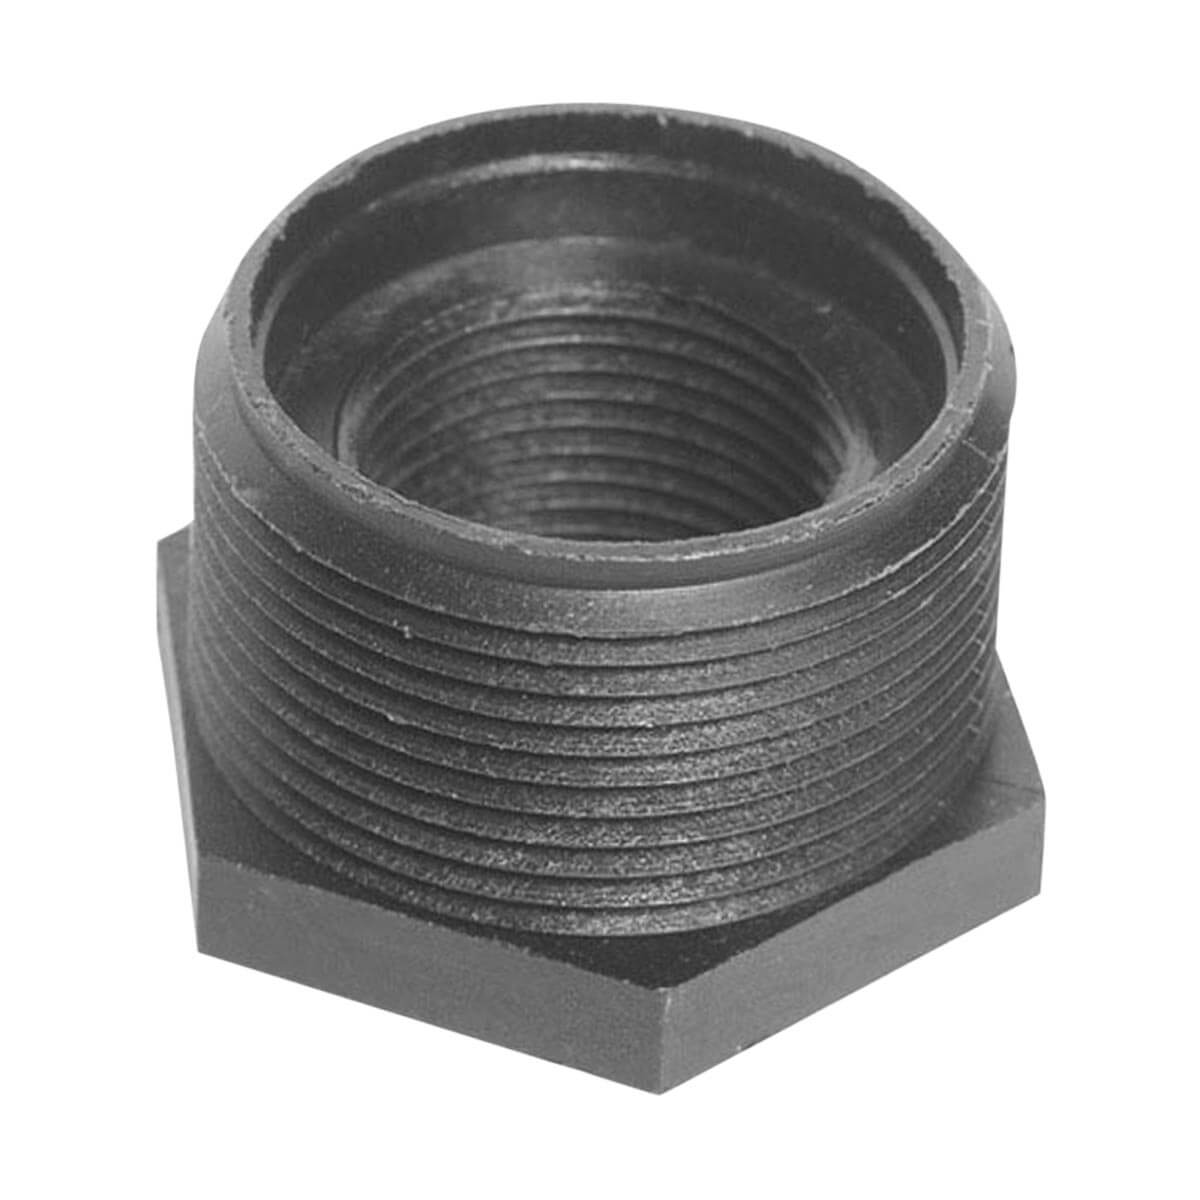 Reducer Bushings MPT x FPT - 1-1/2-in x 1-1/4-in